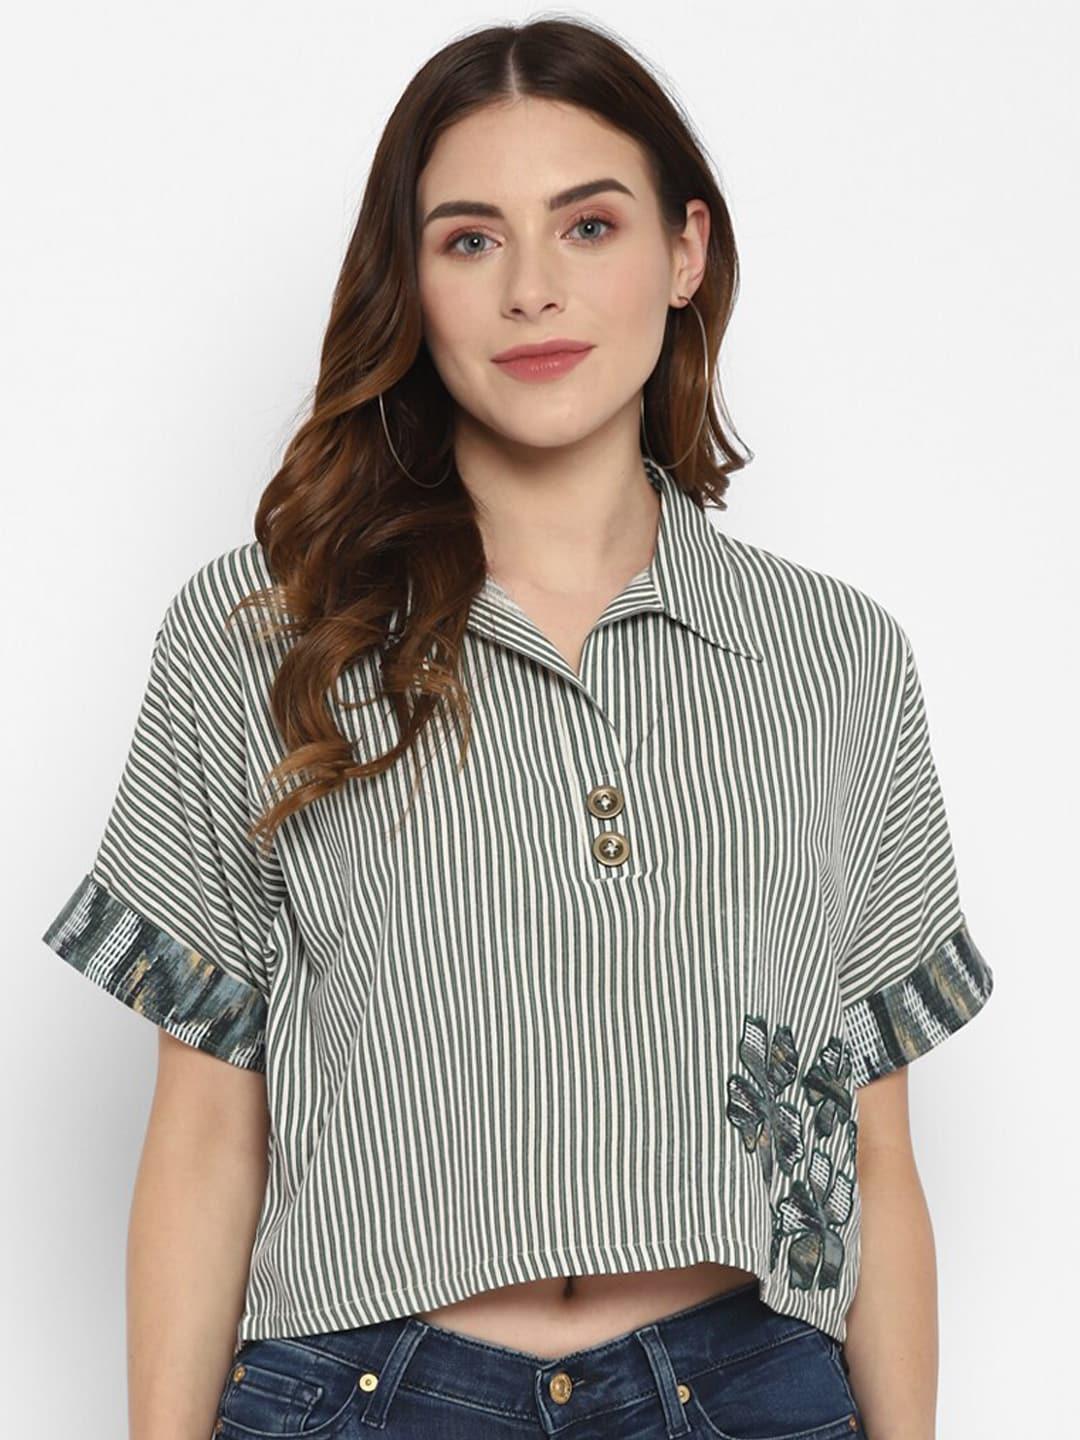 taurus-olive-green-&-white-floral-striped-pure-cotton-shirt-style-crop-top